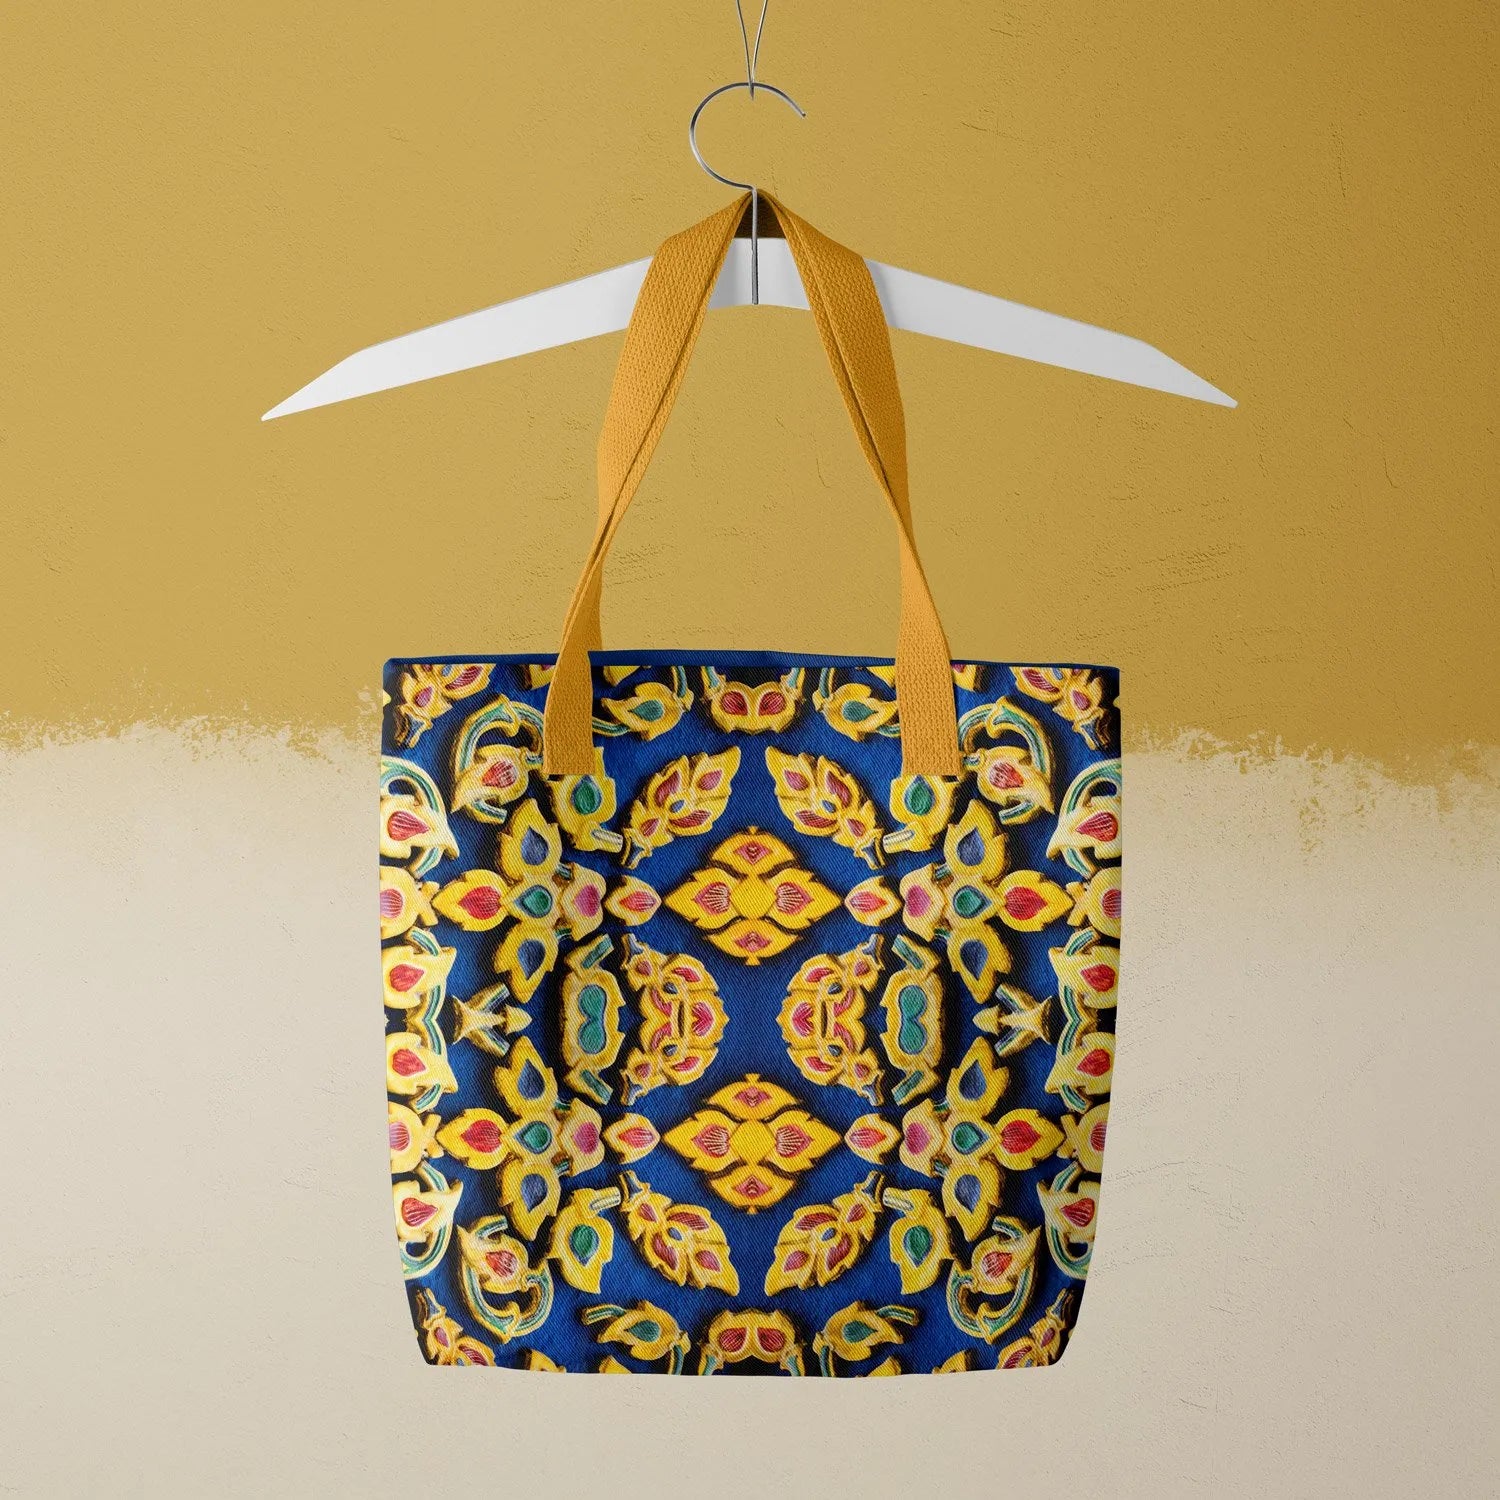 Ayodhya Tote - Heavy Duty Reusable Grocery Bag - Yellow Handles - Shopping Totes - Aesthetic Art